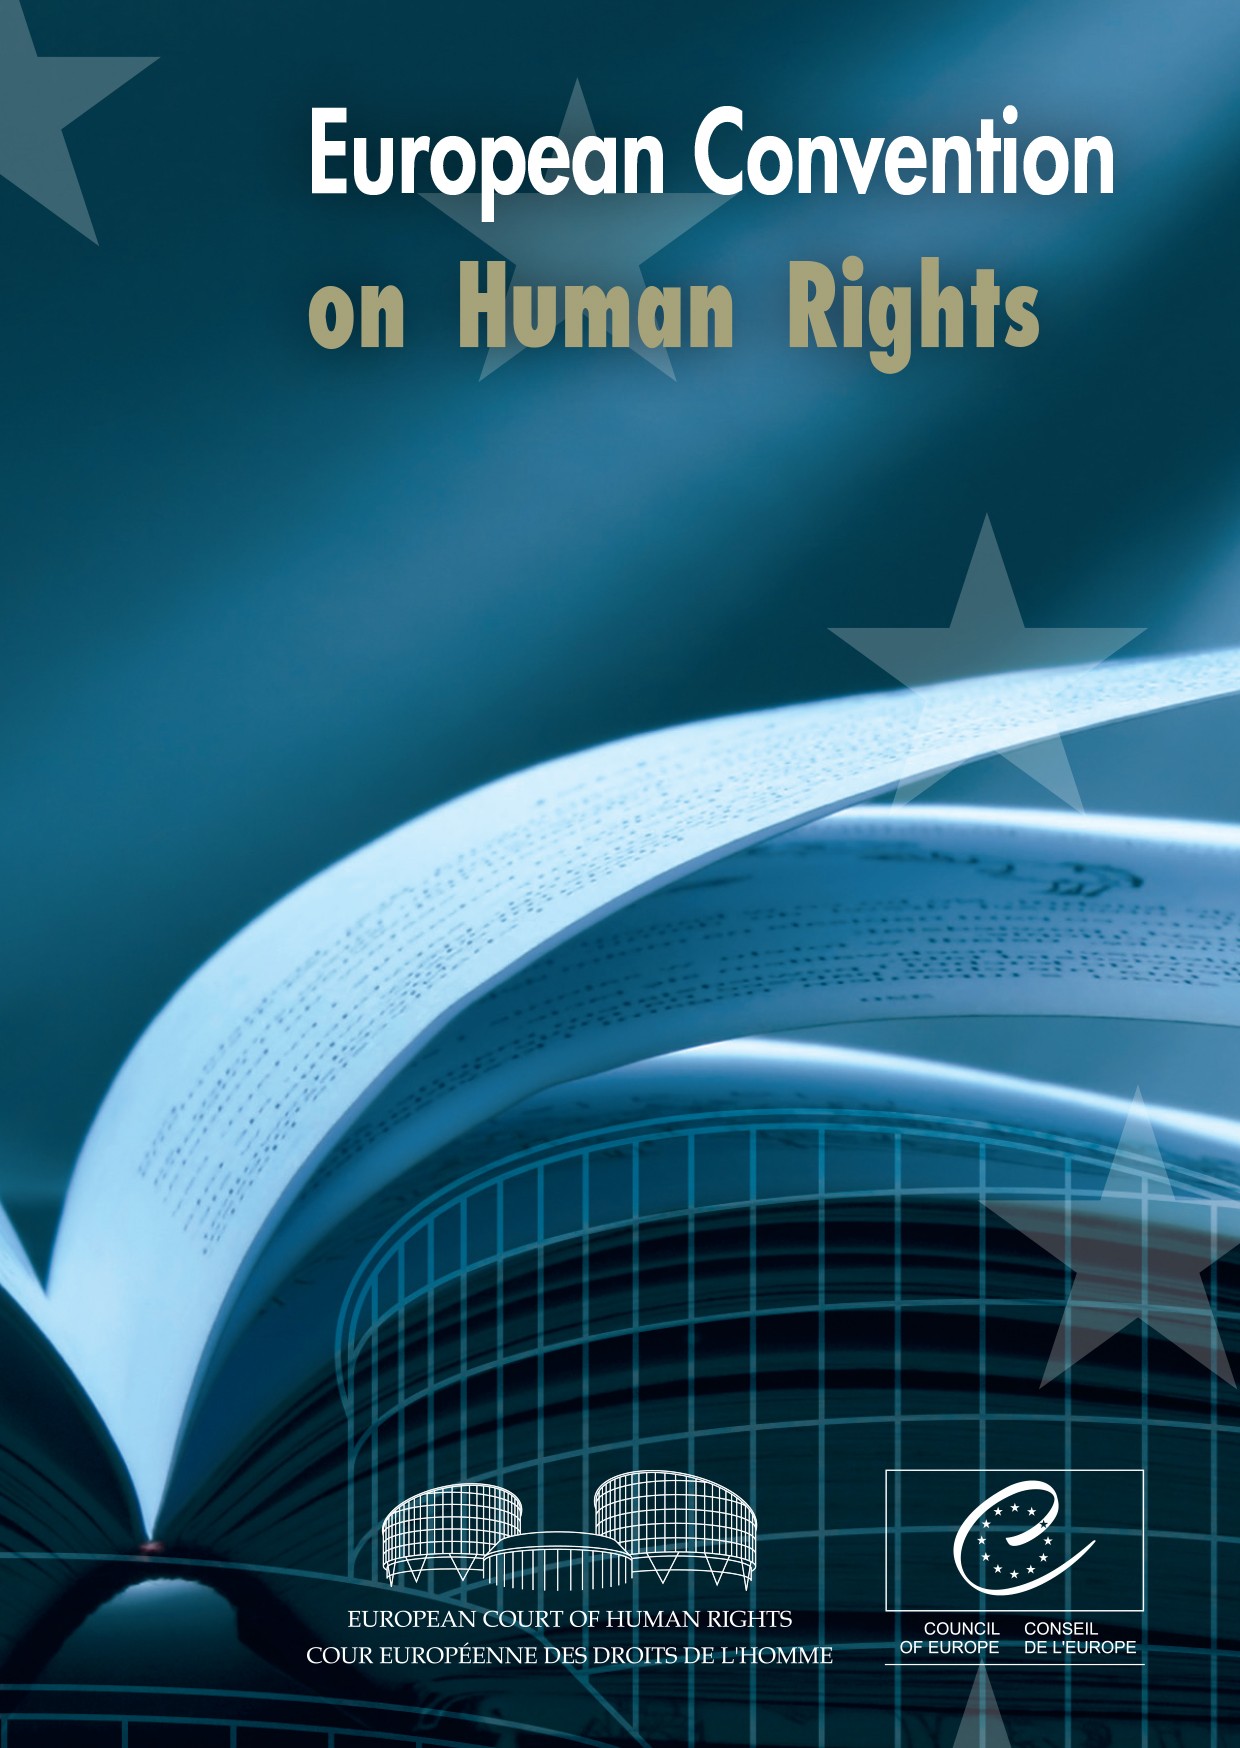 The protection of human rights within the Council of Europe